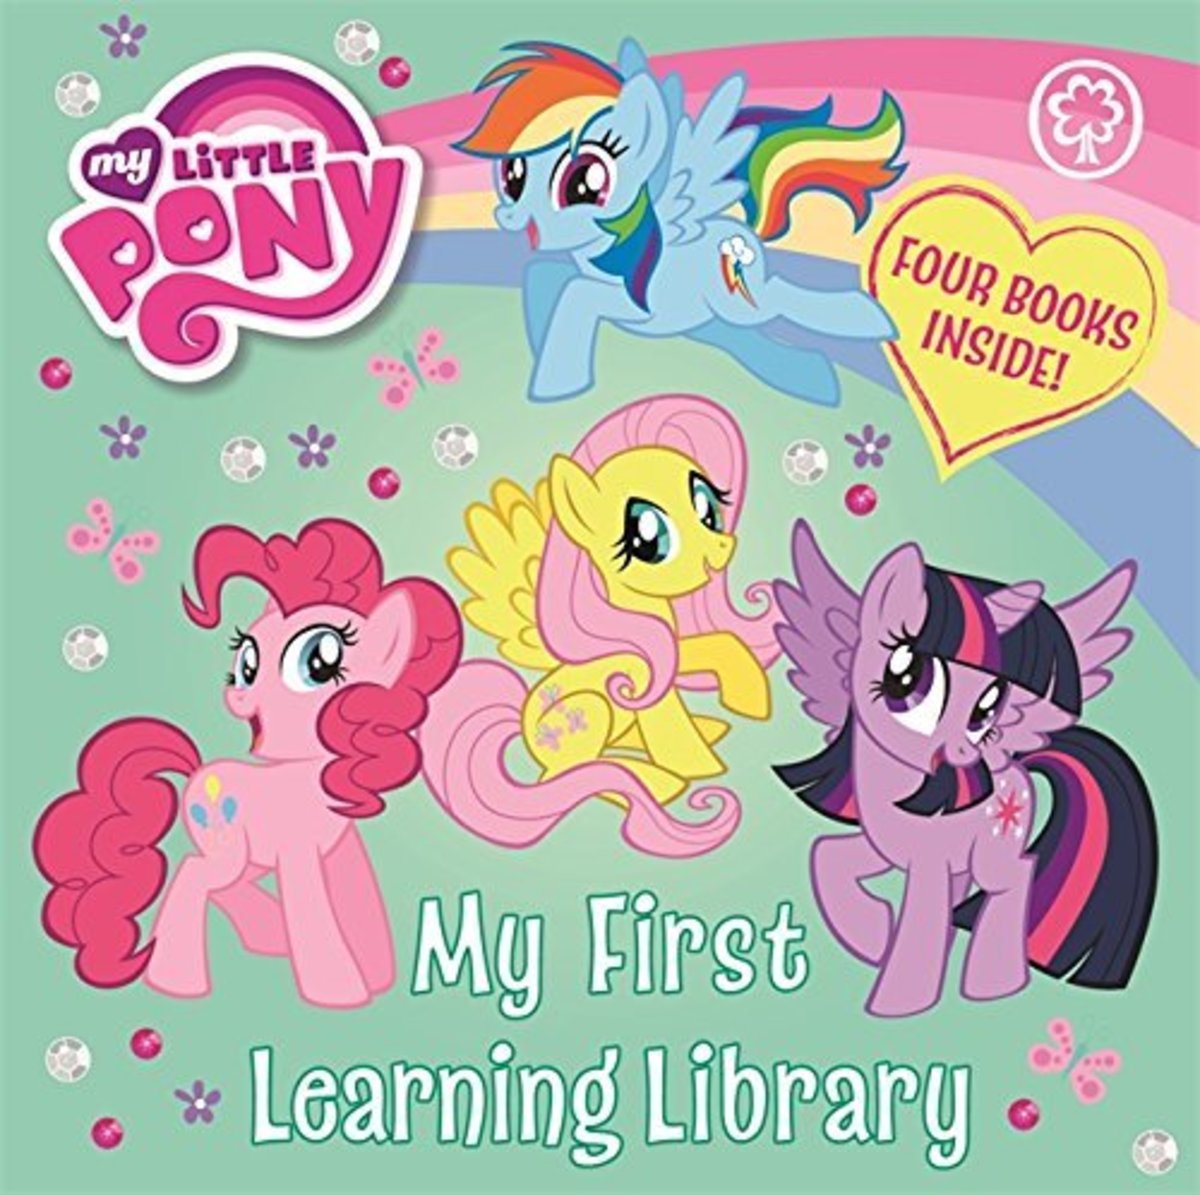 ORCHARD BOOKS | 【正版正貨】My Little Pony:My First Learning Library | HKTVmall  香港最大網購平台